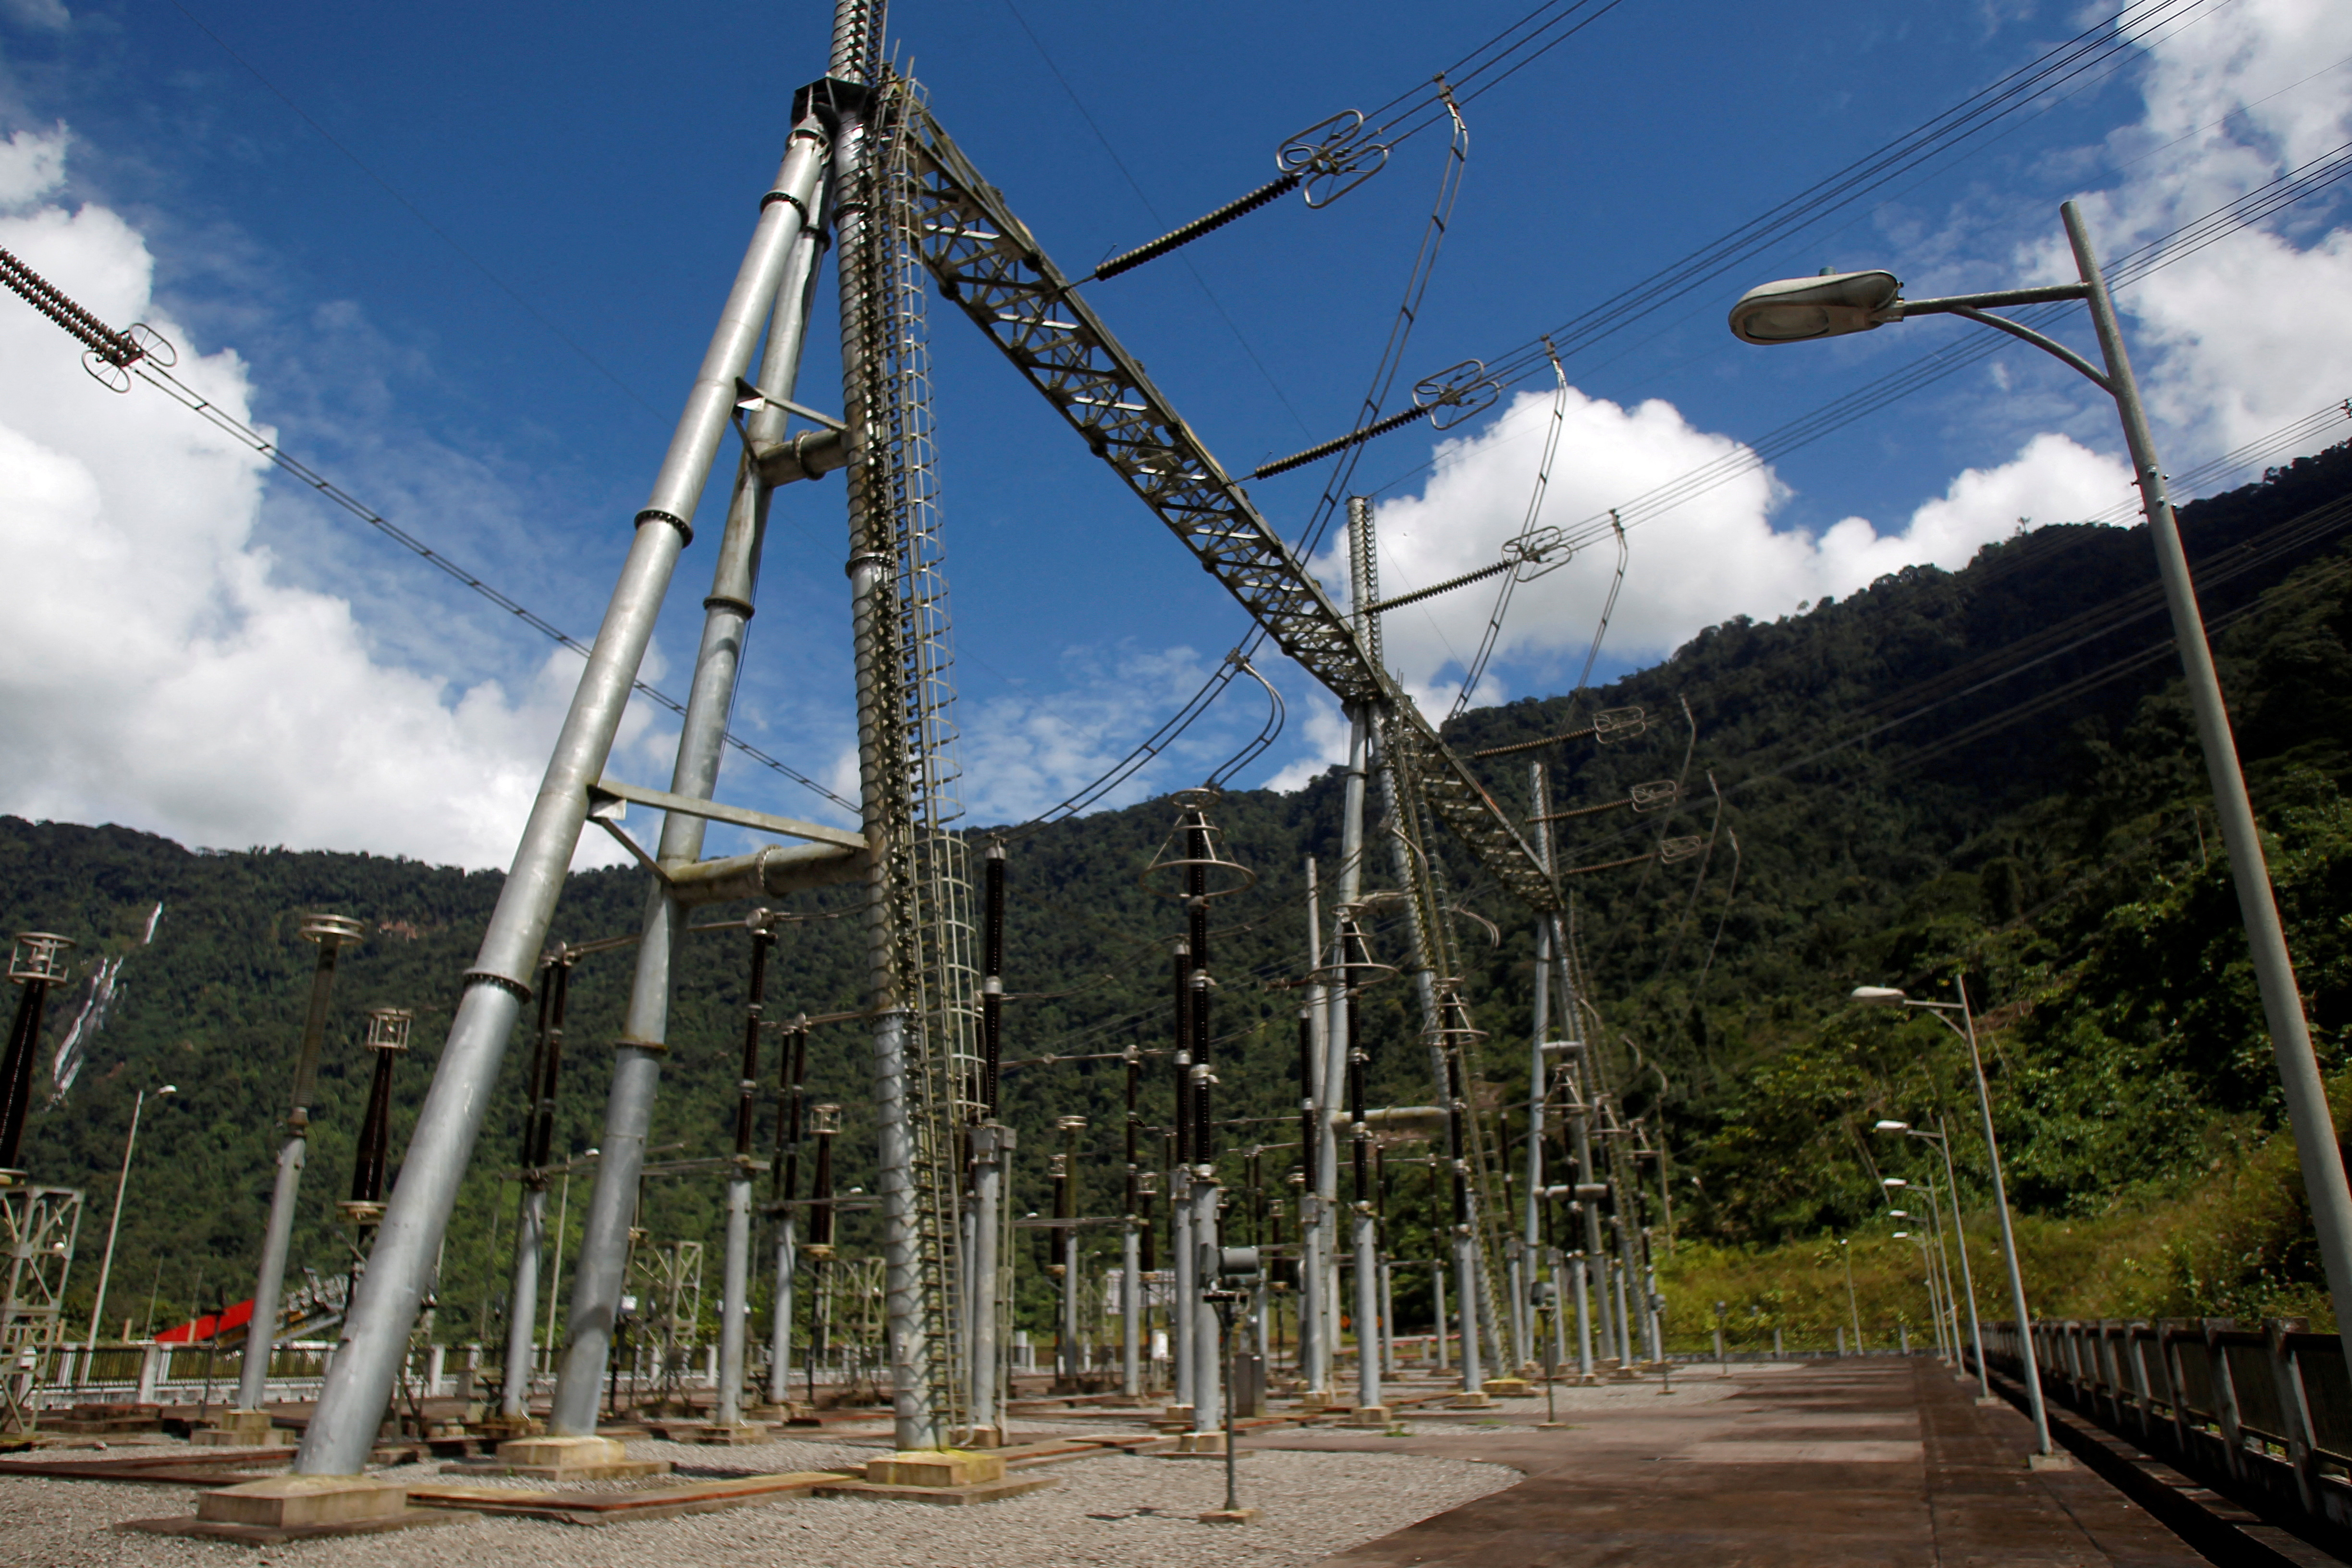 View of  the installations of Ecuador's hydroelectric power station Coca Codo Sinclair in Napo